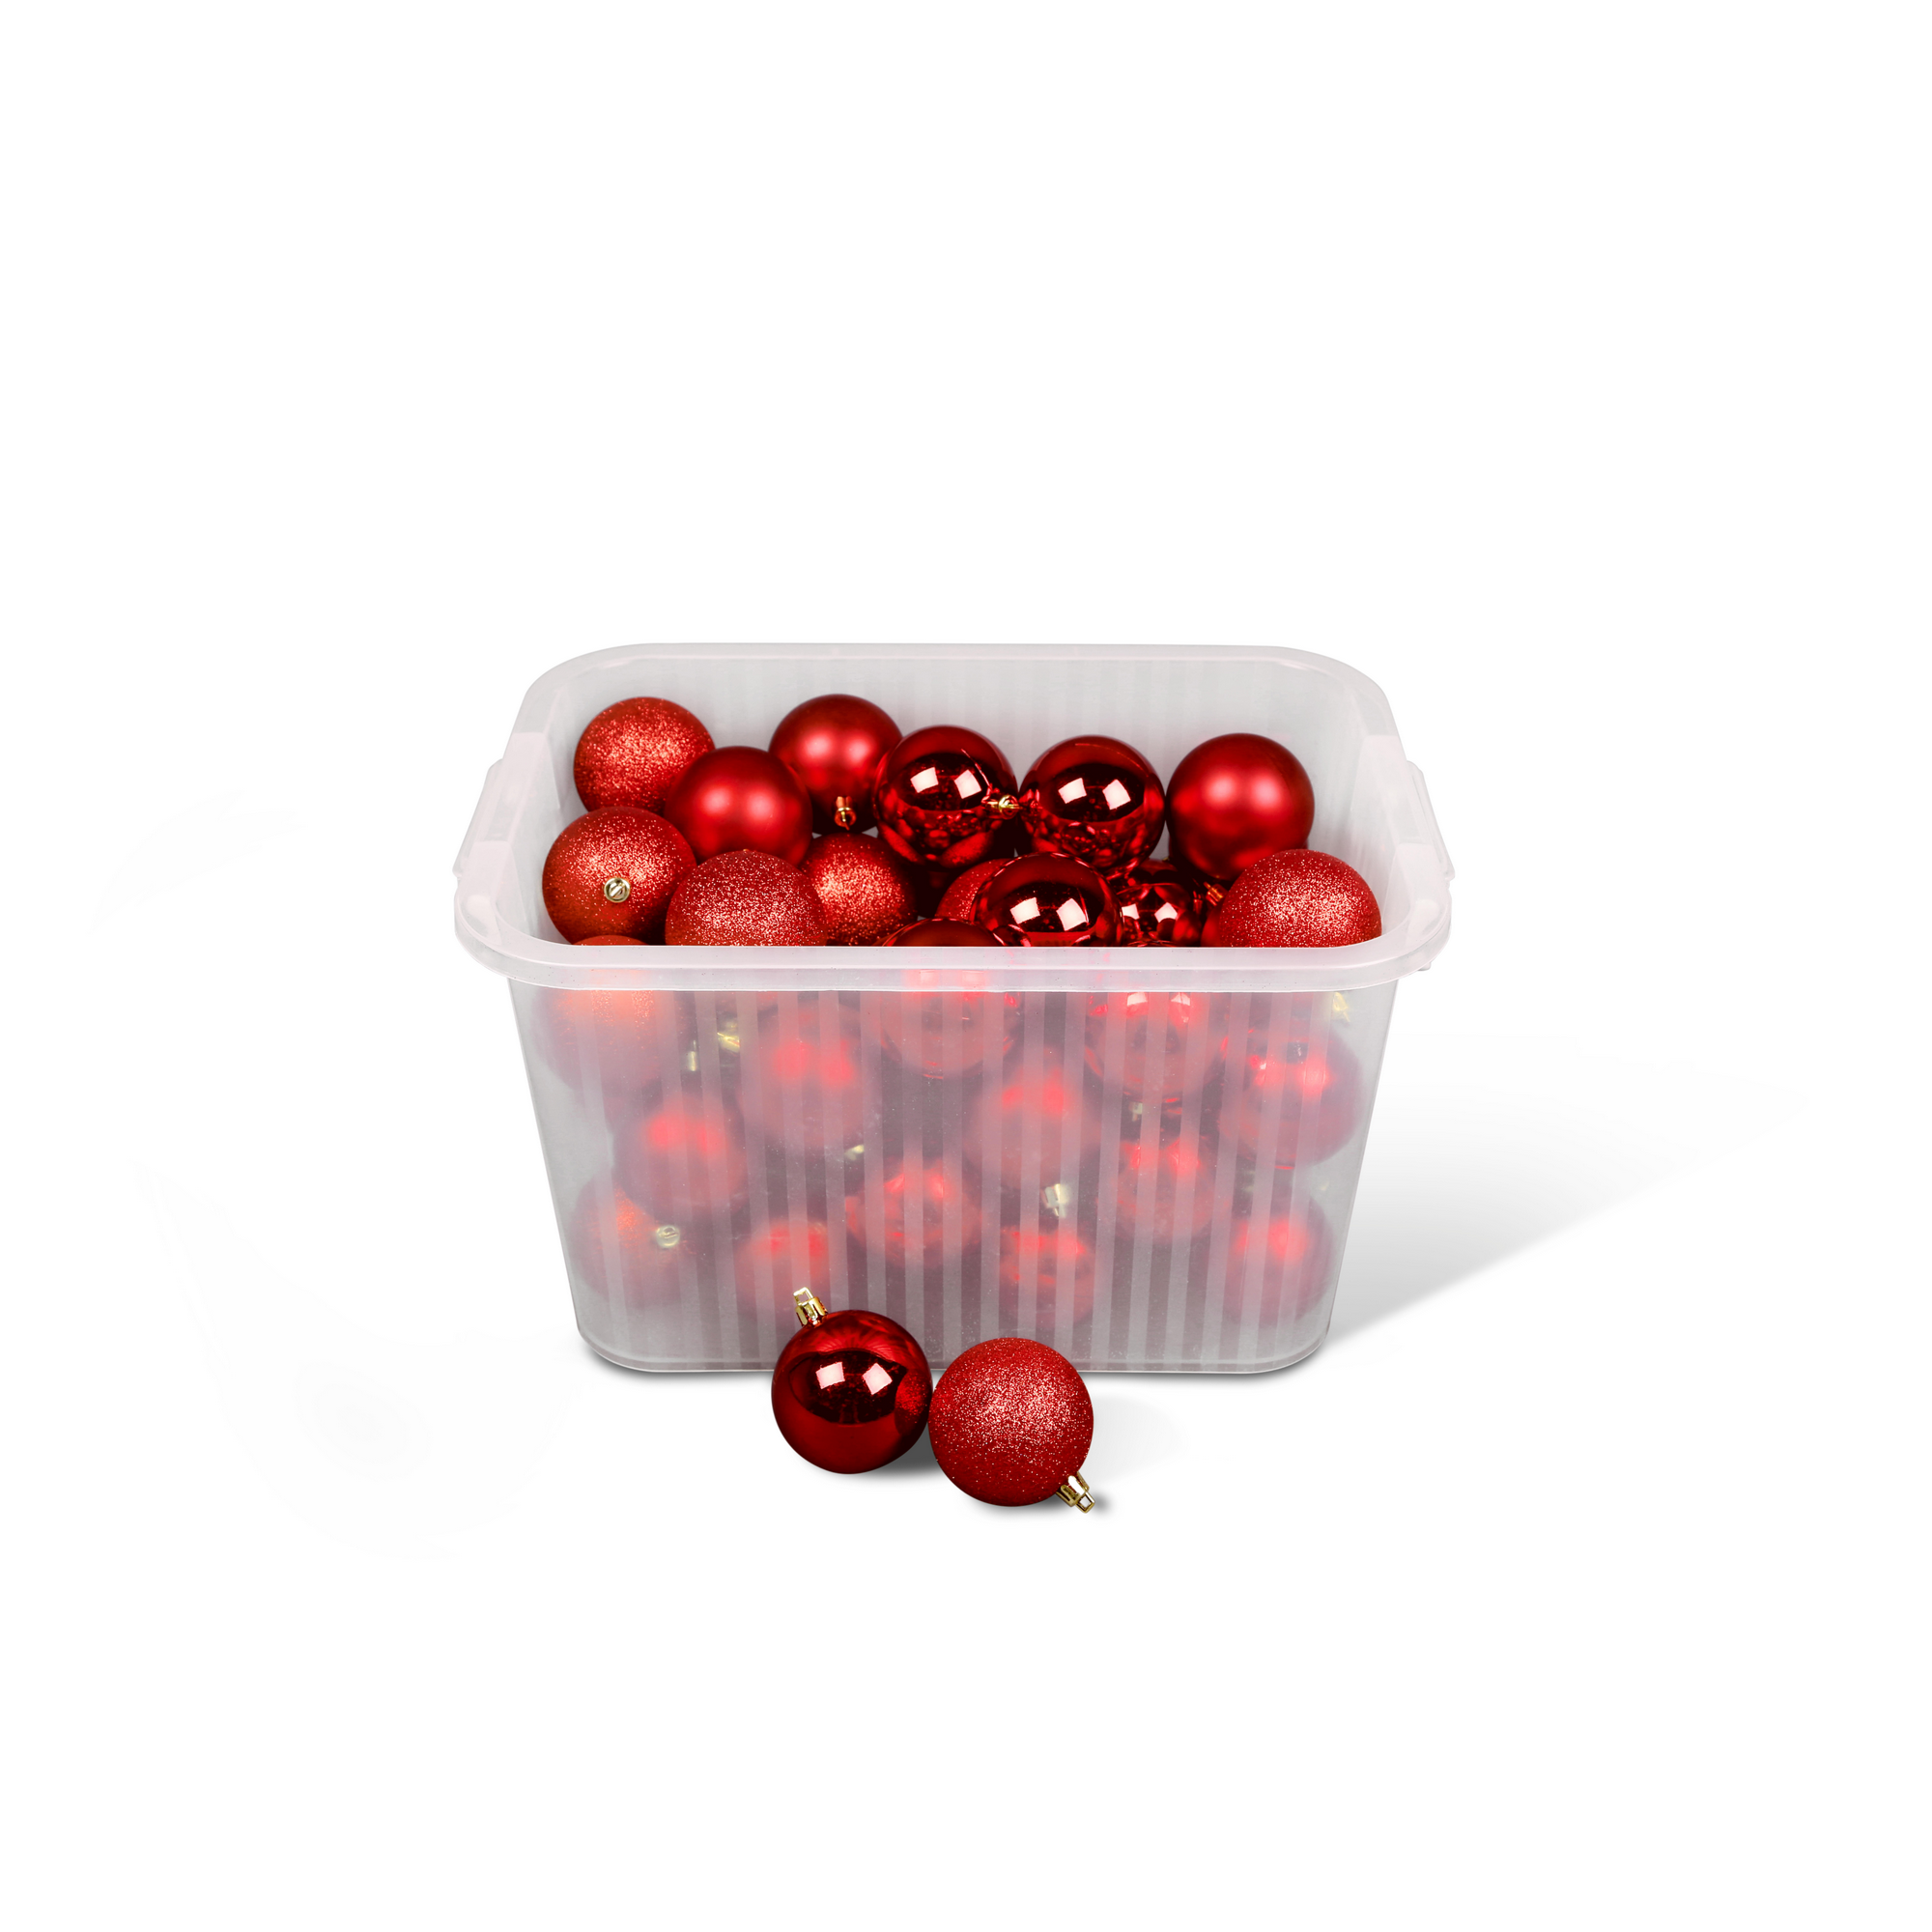 Christbaumkugeln rot Ø 6 cm, 60-teilig + product picture